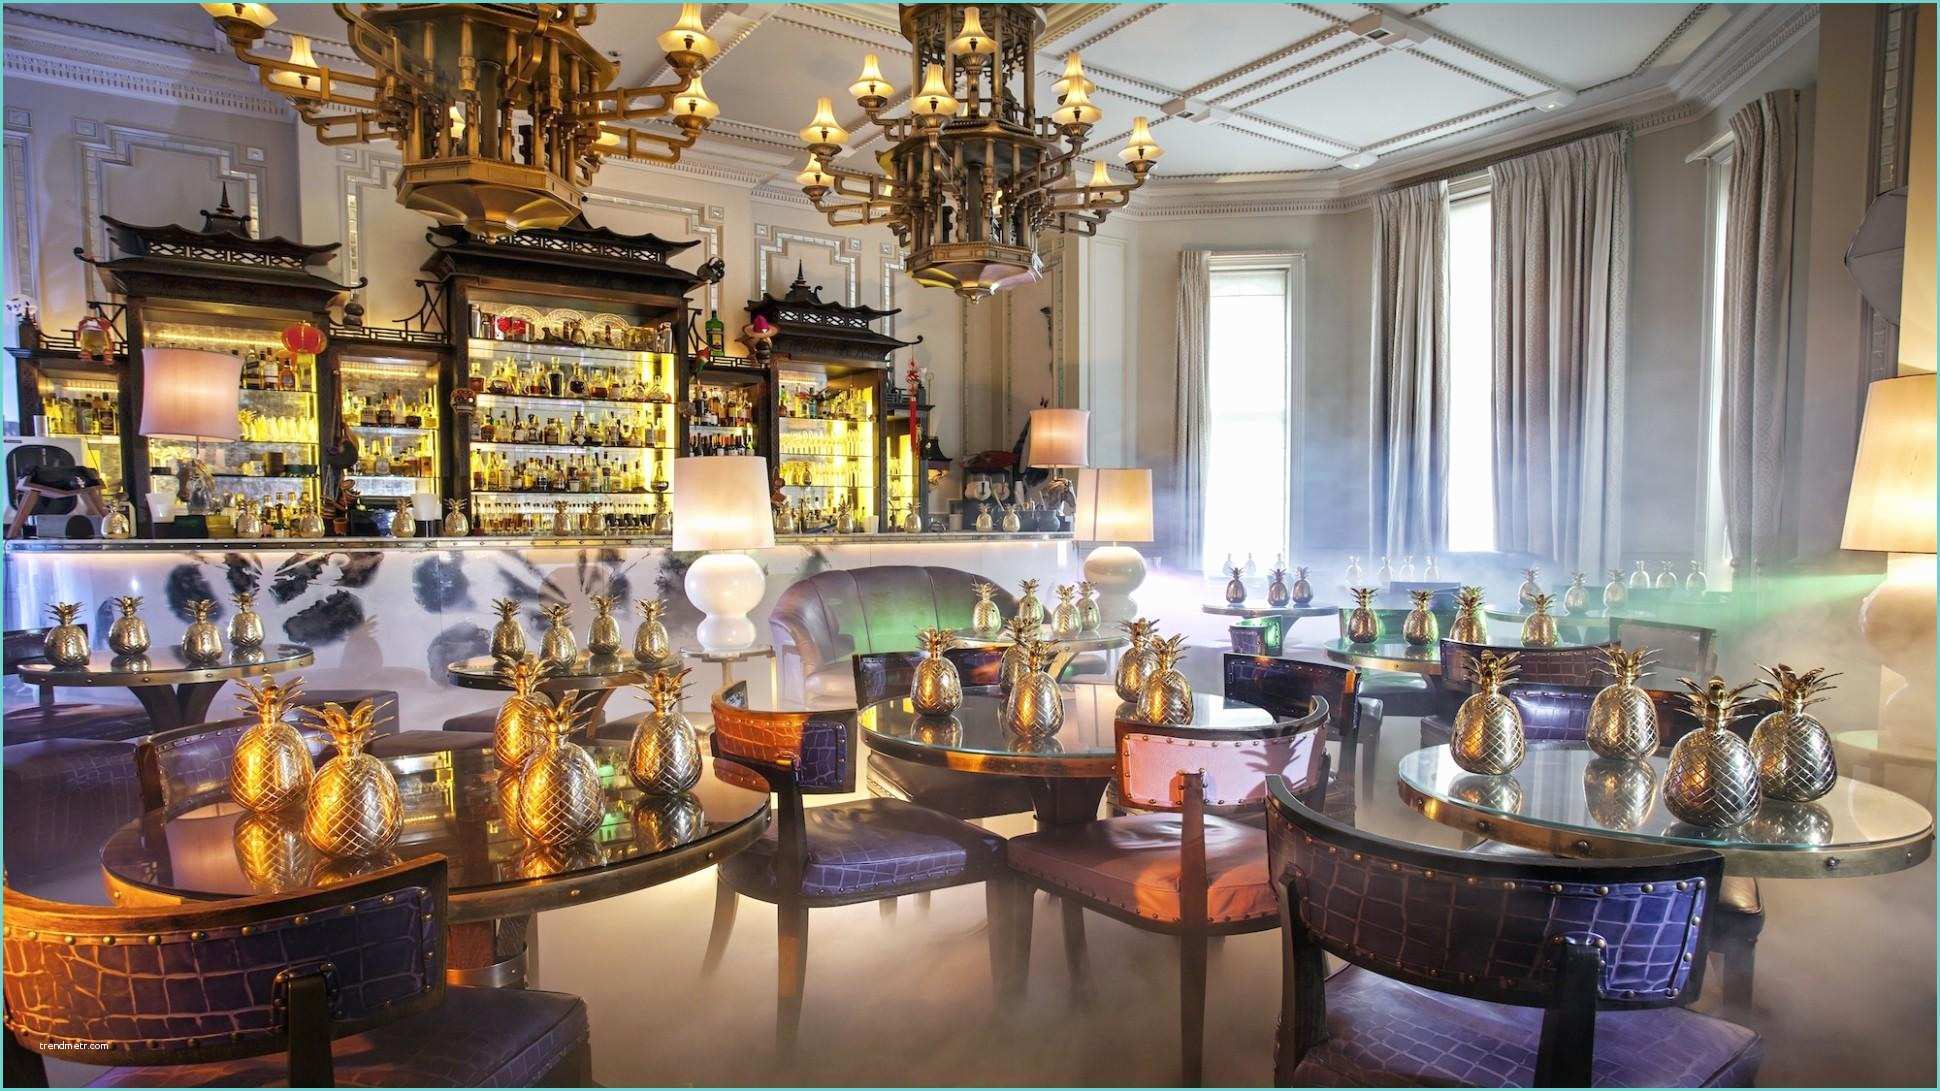 Pictures Of A Bar the World S 50 Best Bars for 2015 Announced London S